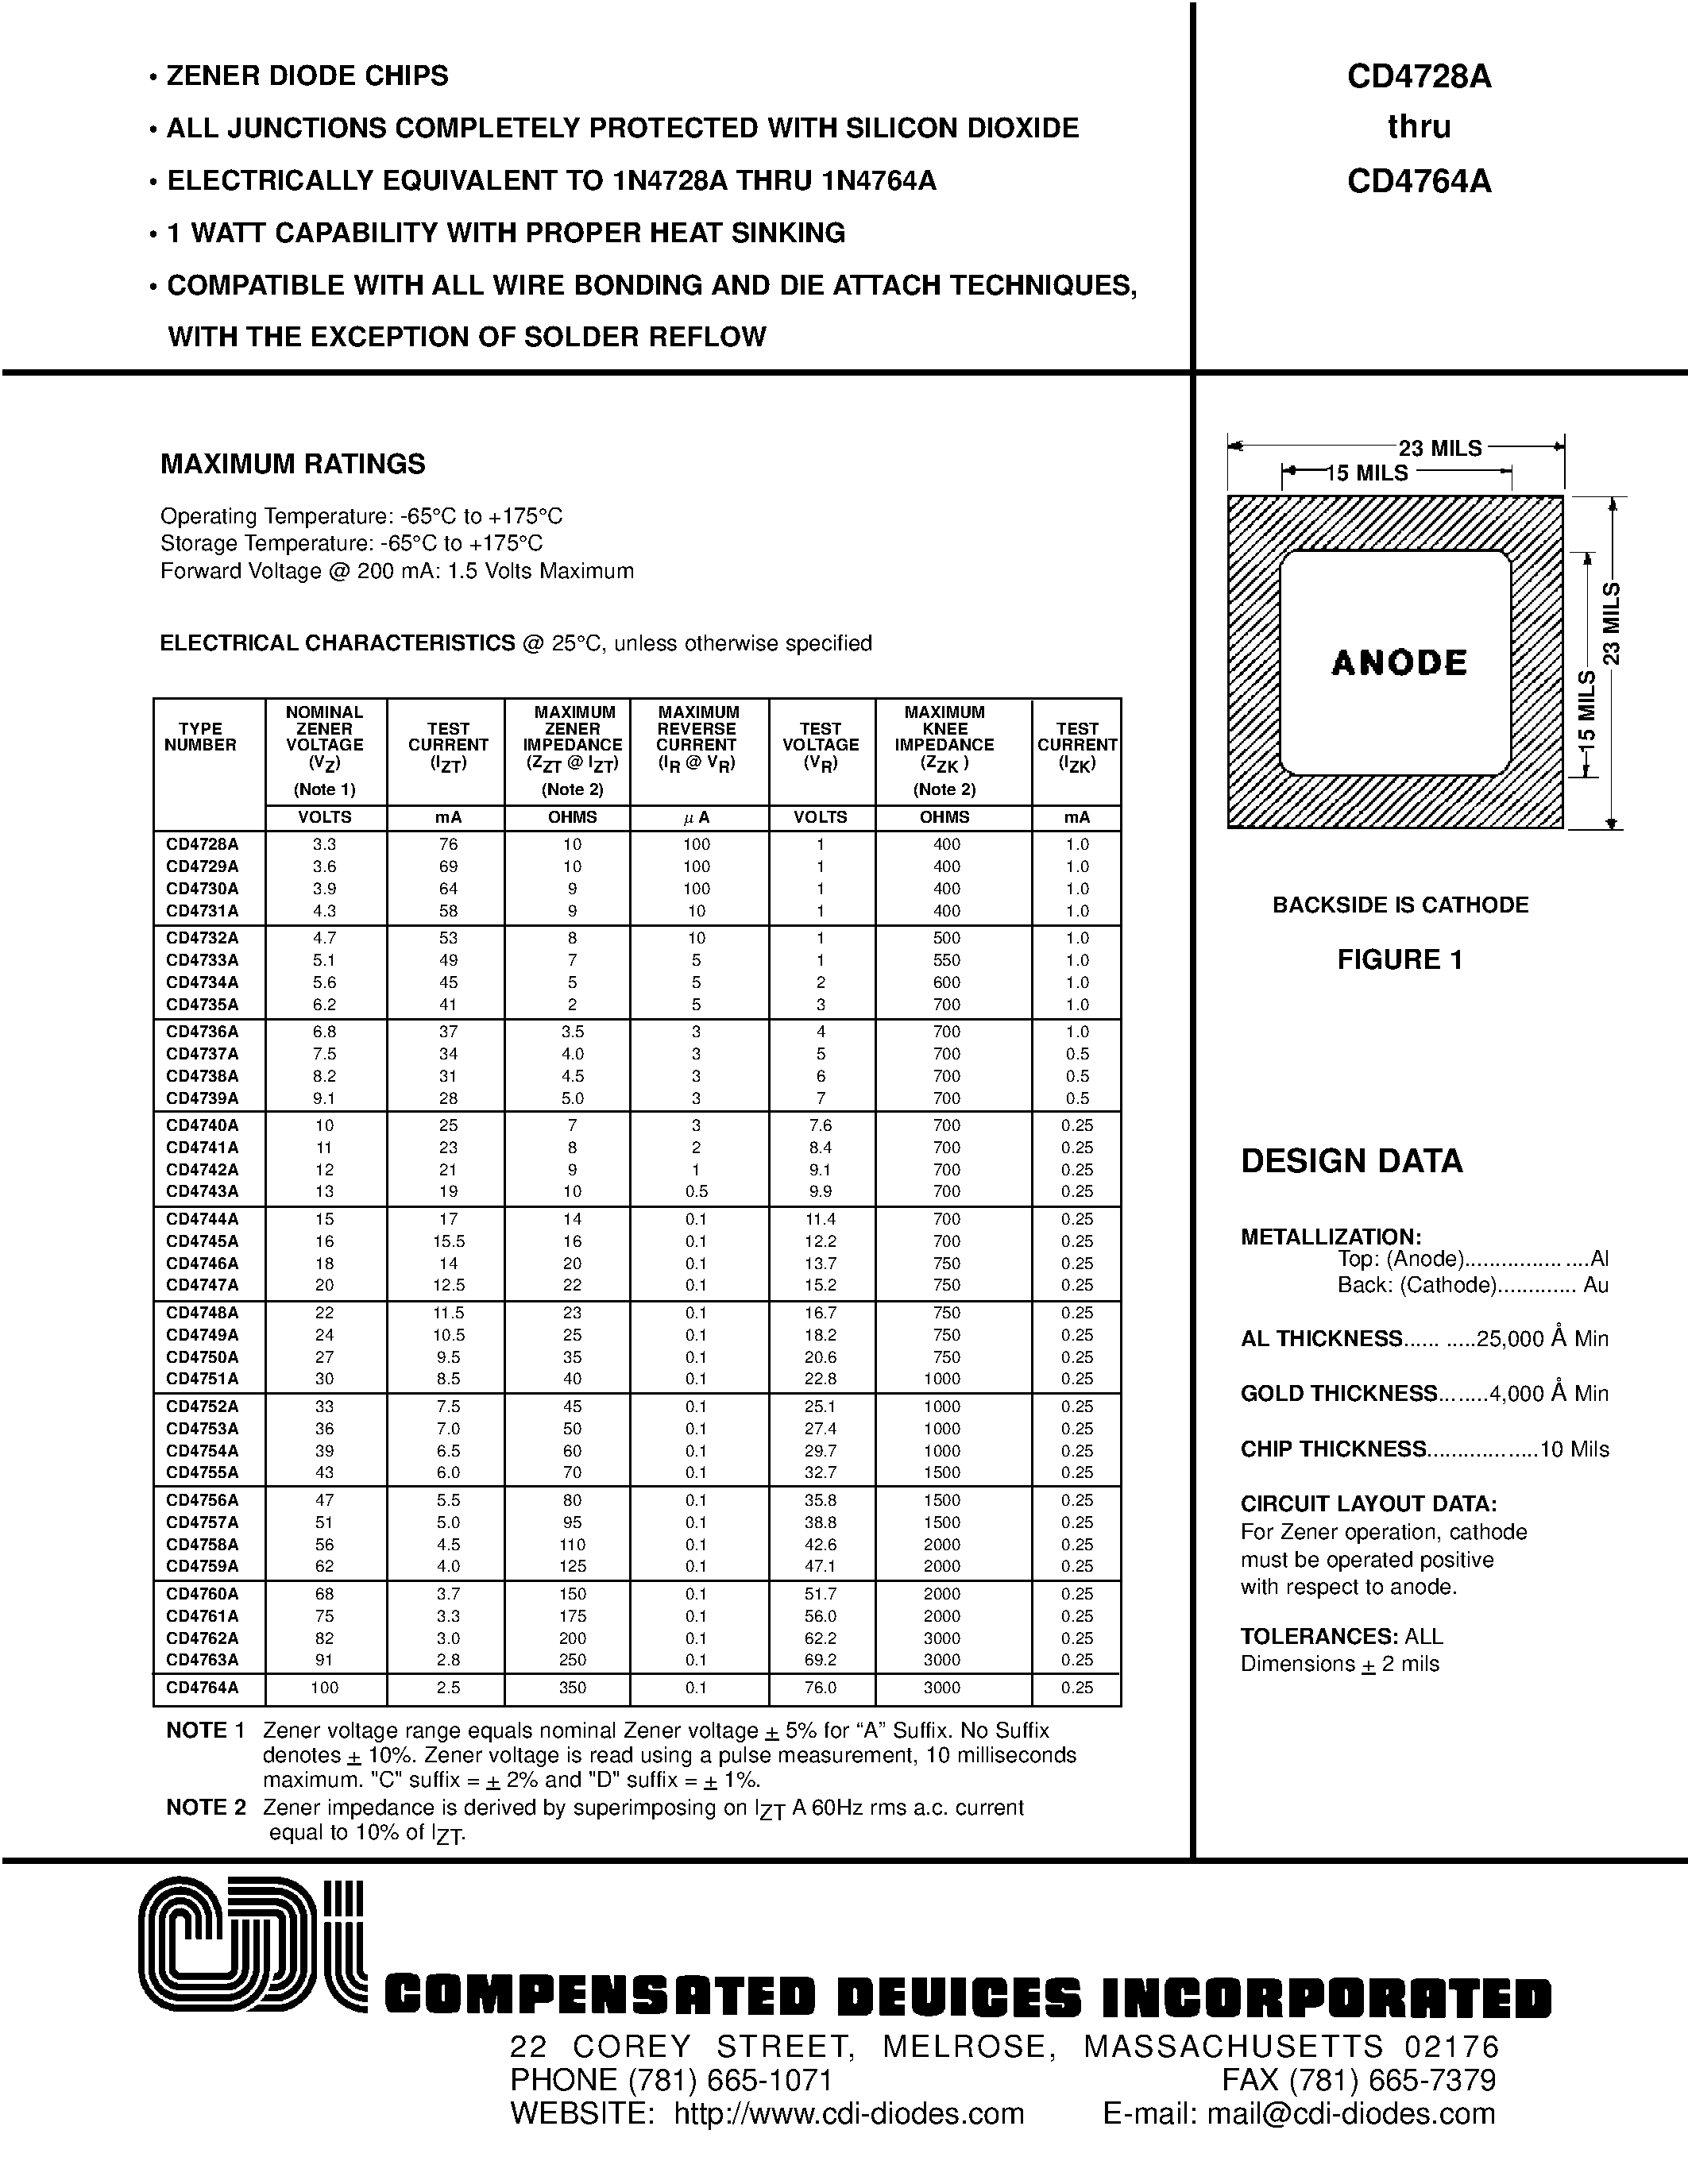 Datasheet CD4760A - ZENER DIODE CHIPS page 1